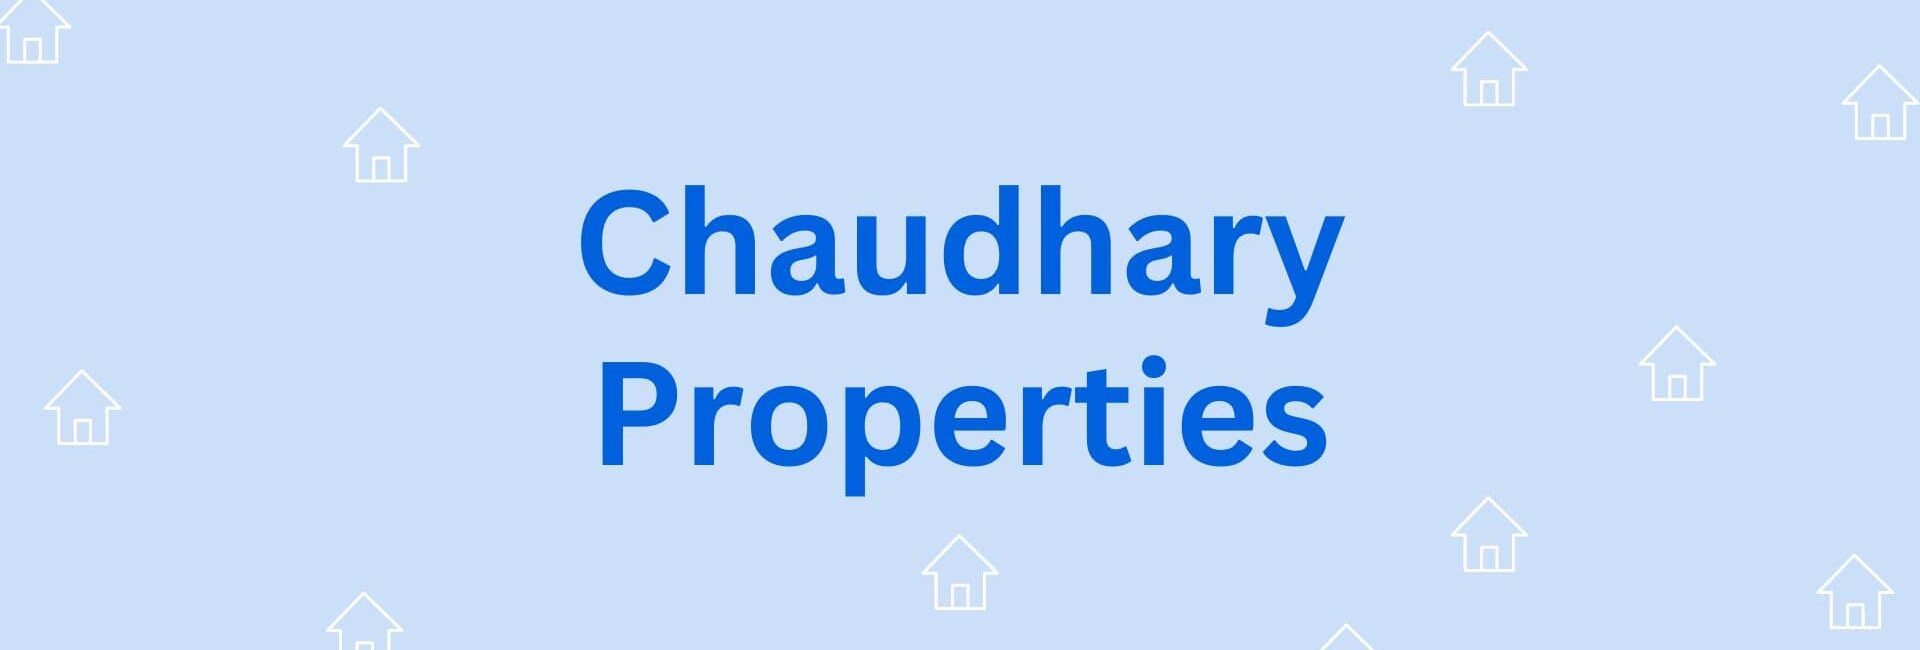 Chaudhary Properties - Real Estate Agent in Hisar